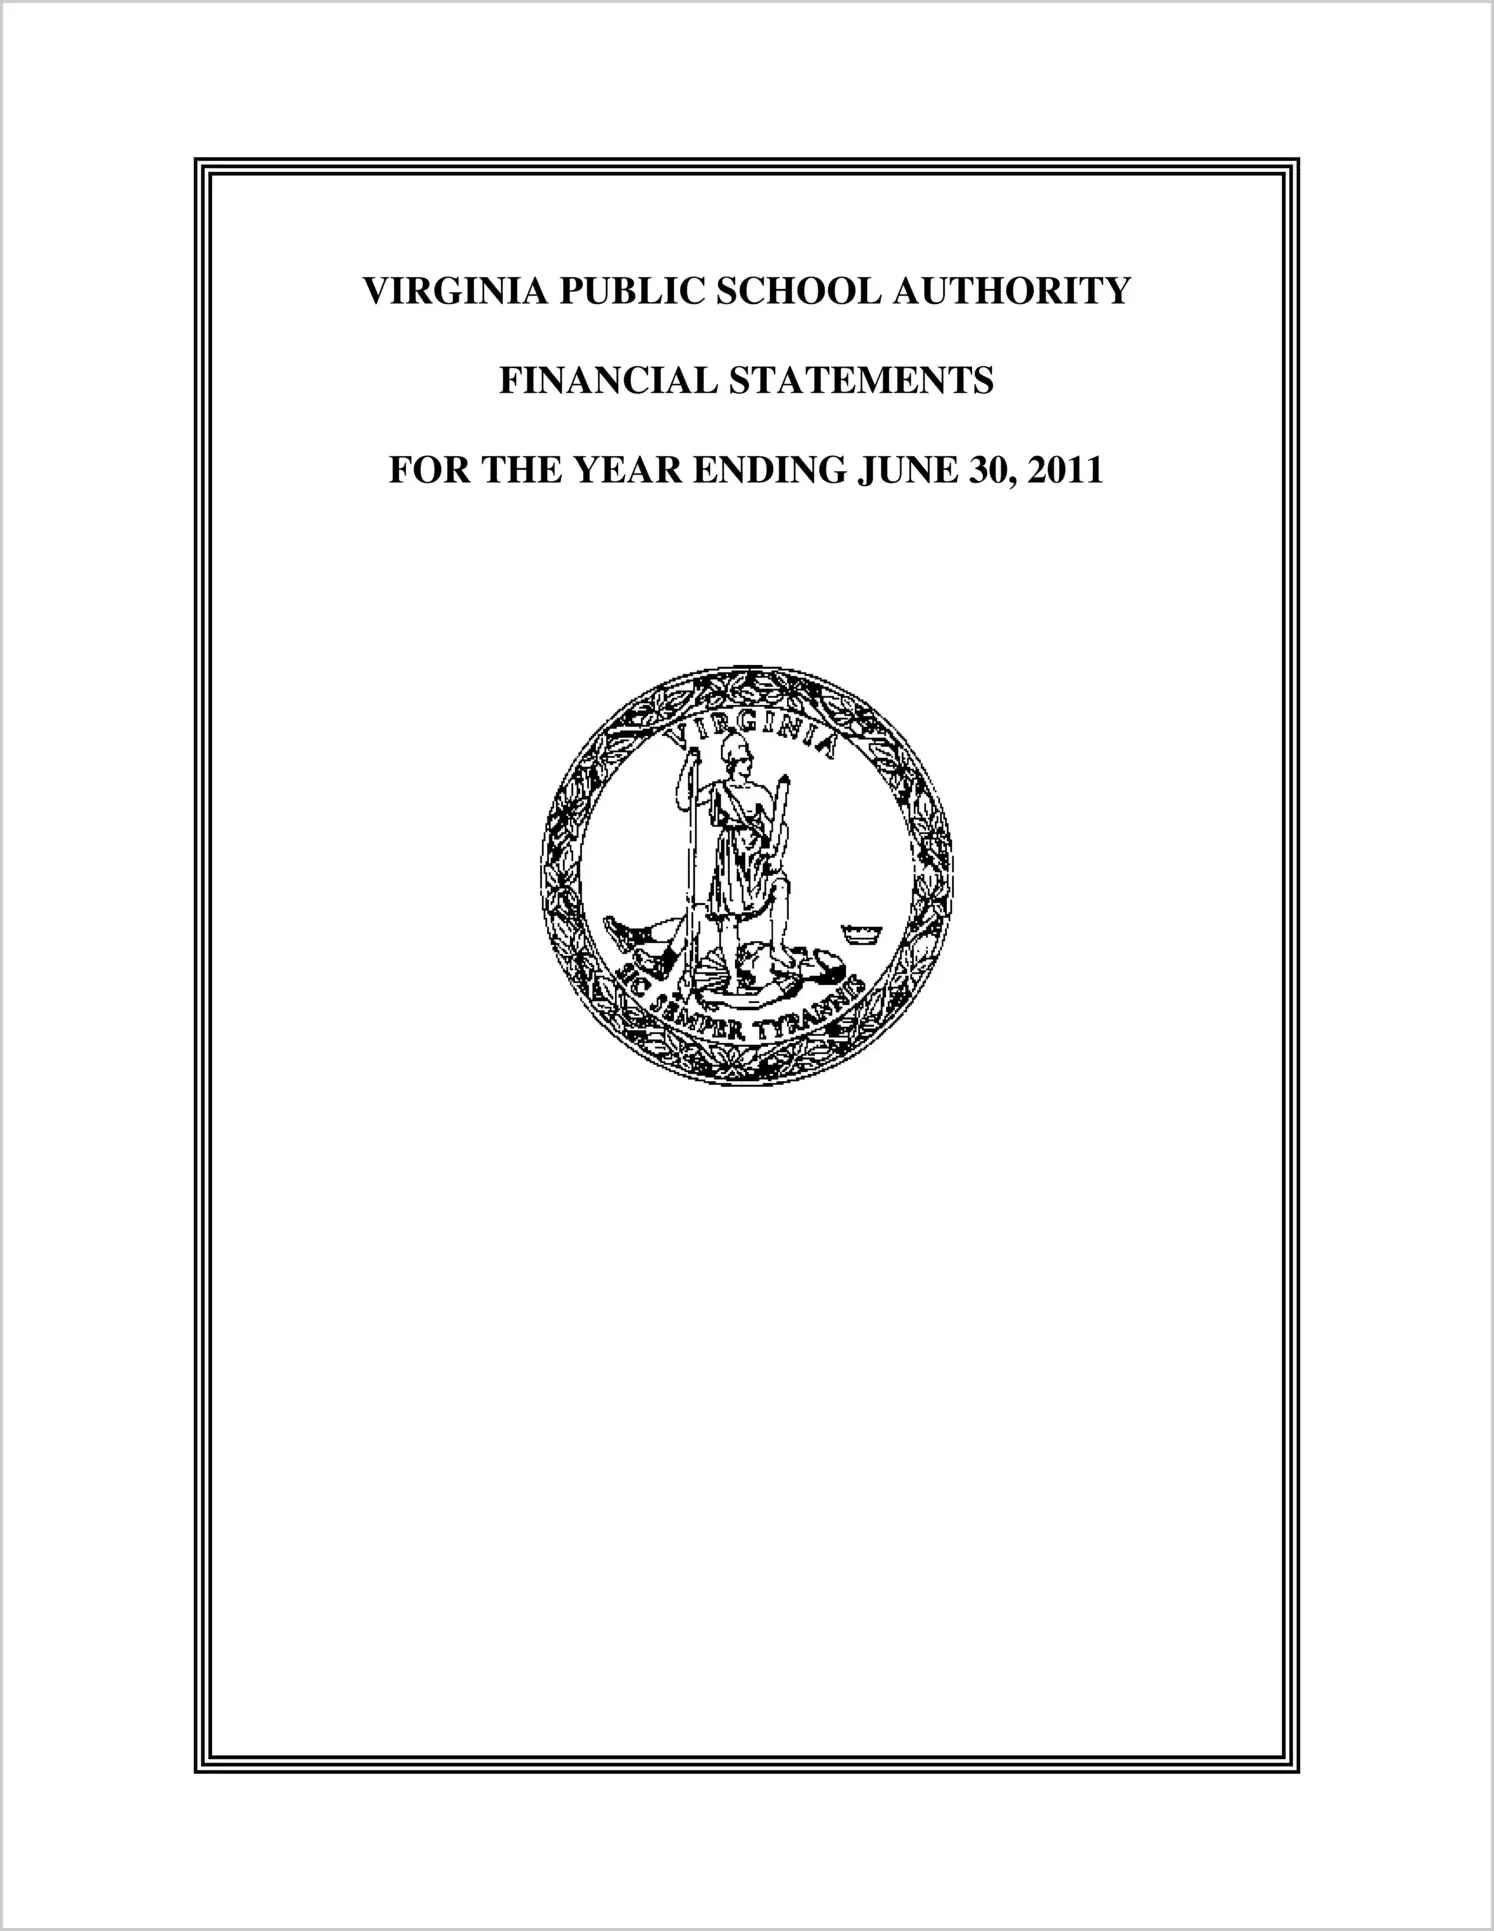 Virginia Public School Authority for the year ended June 30, 2011